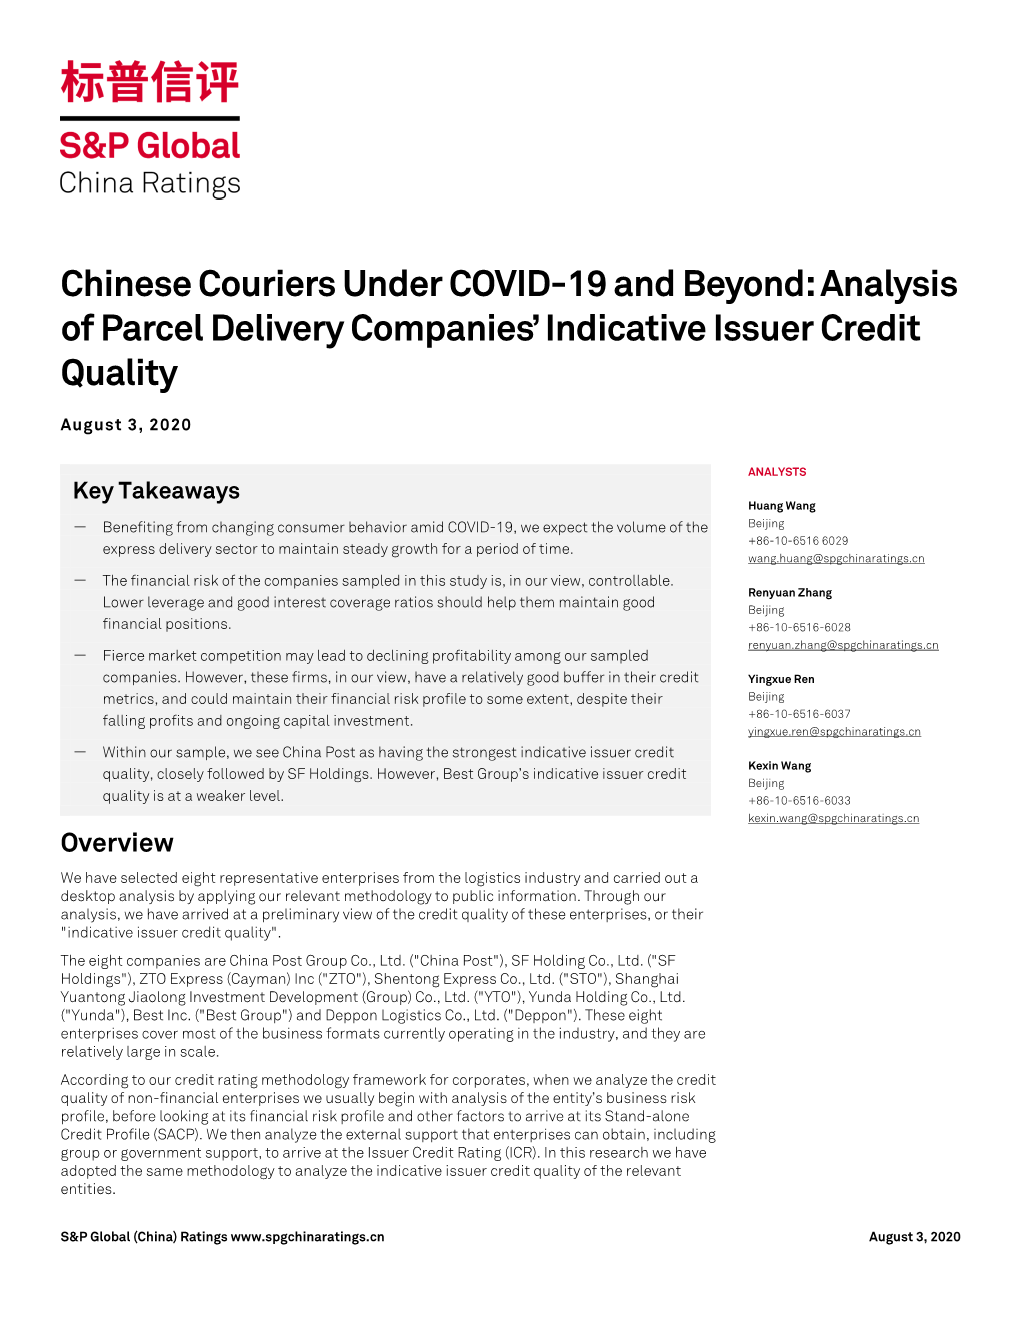 Analysis of Parcel Delivery Companies' Indicative Issuer Credit